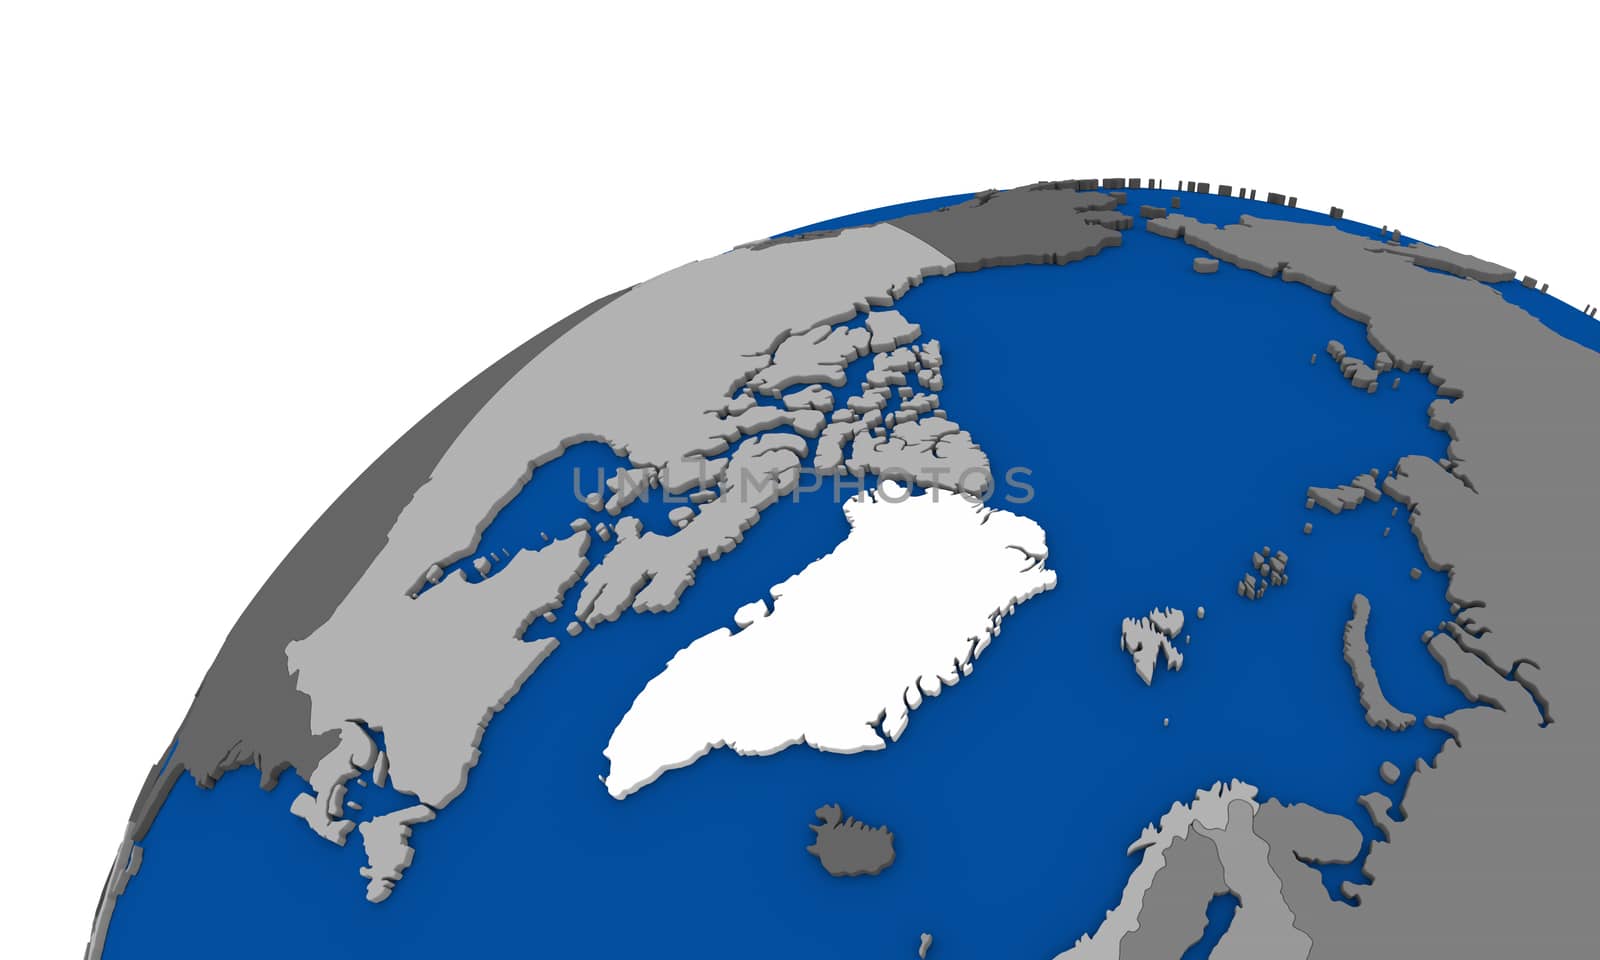 Arctic north polar region on Earth political map by Harvepino